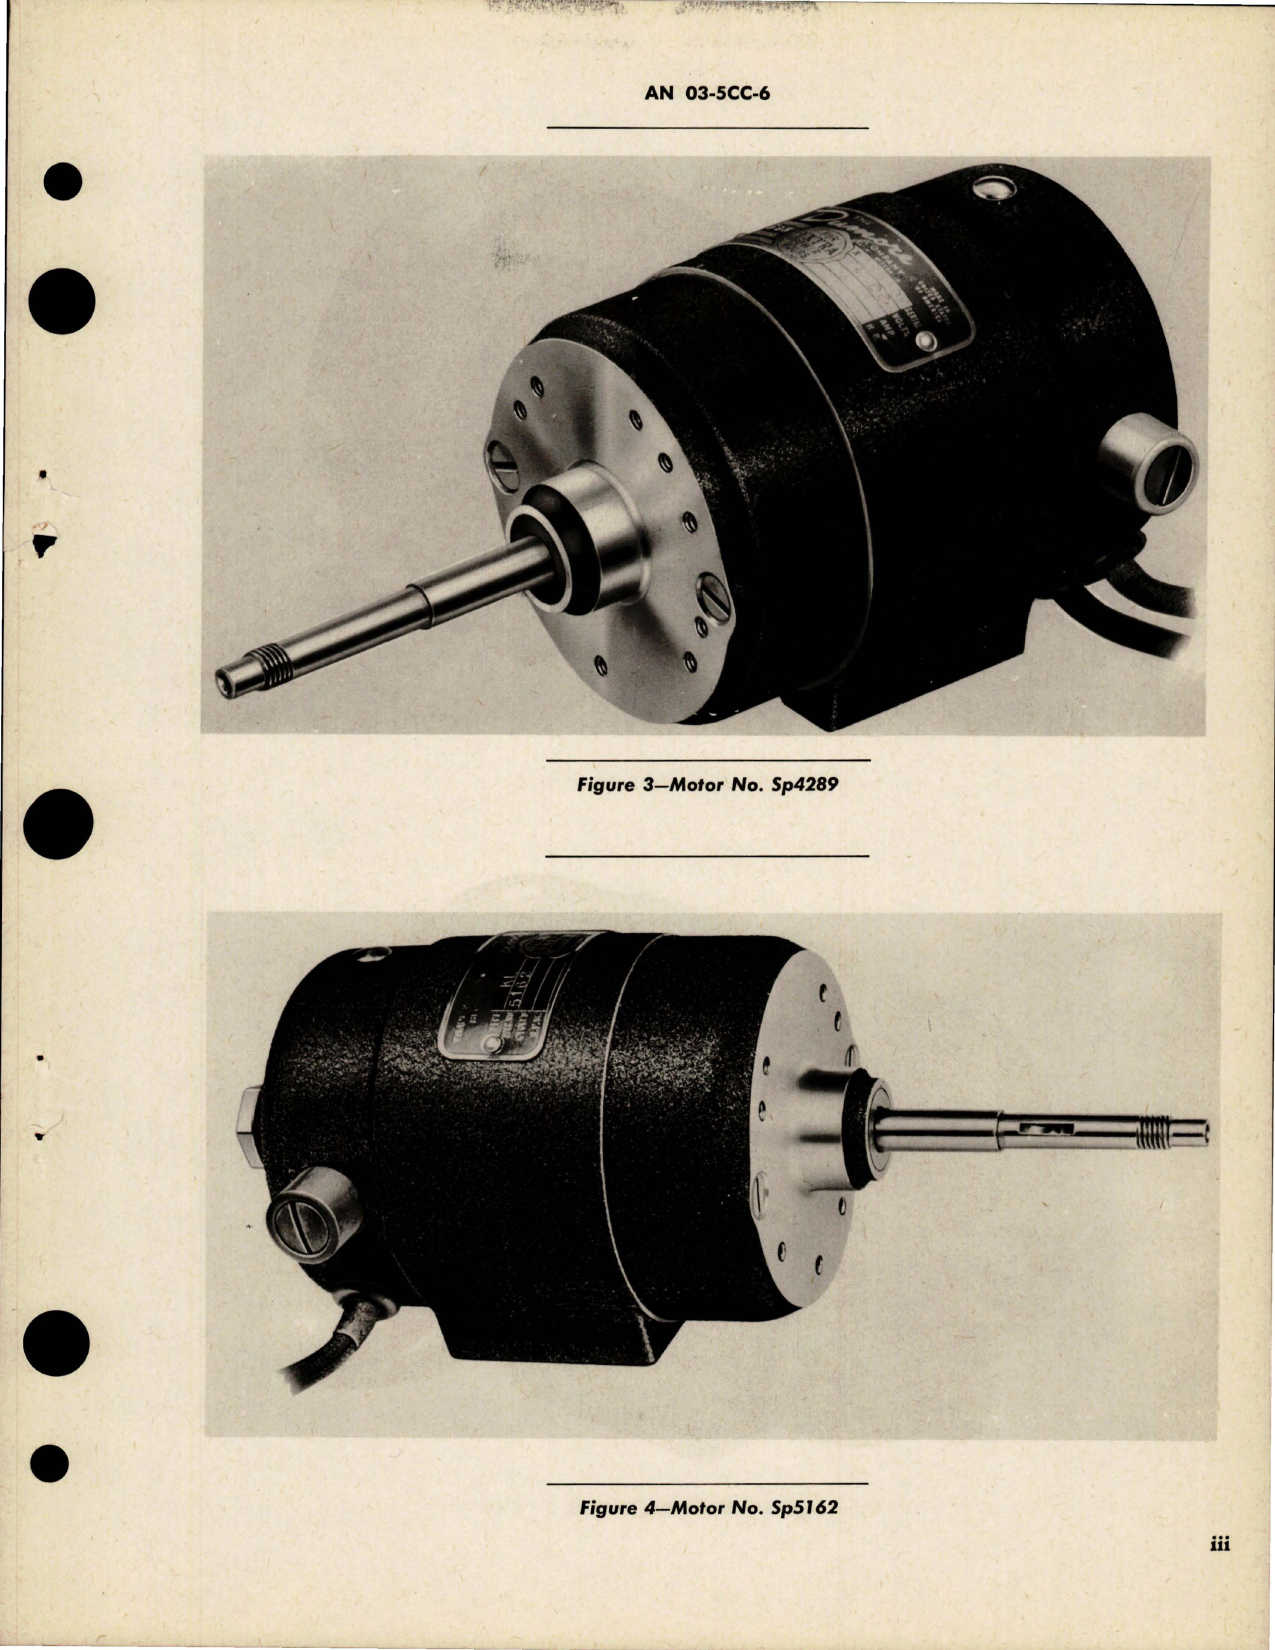 Sample page 5 from AirCorps Library document: Operation, Service, Overhaul Instruction with Parts for Fractional Horsepower Electric Motors 